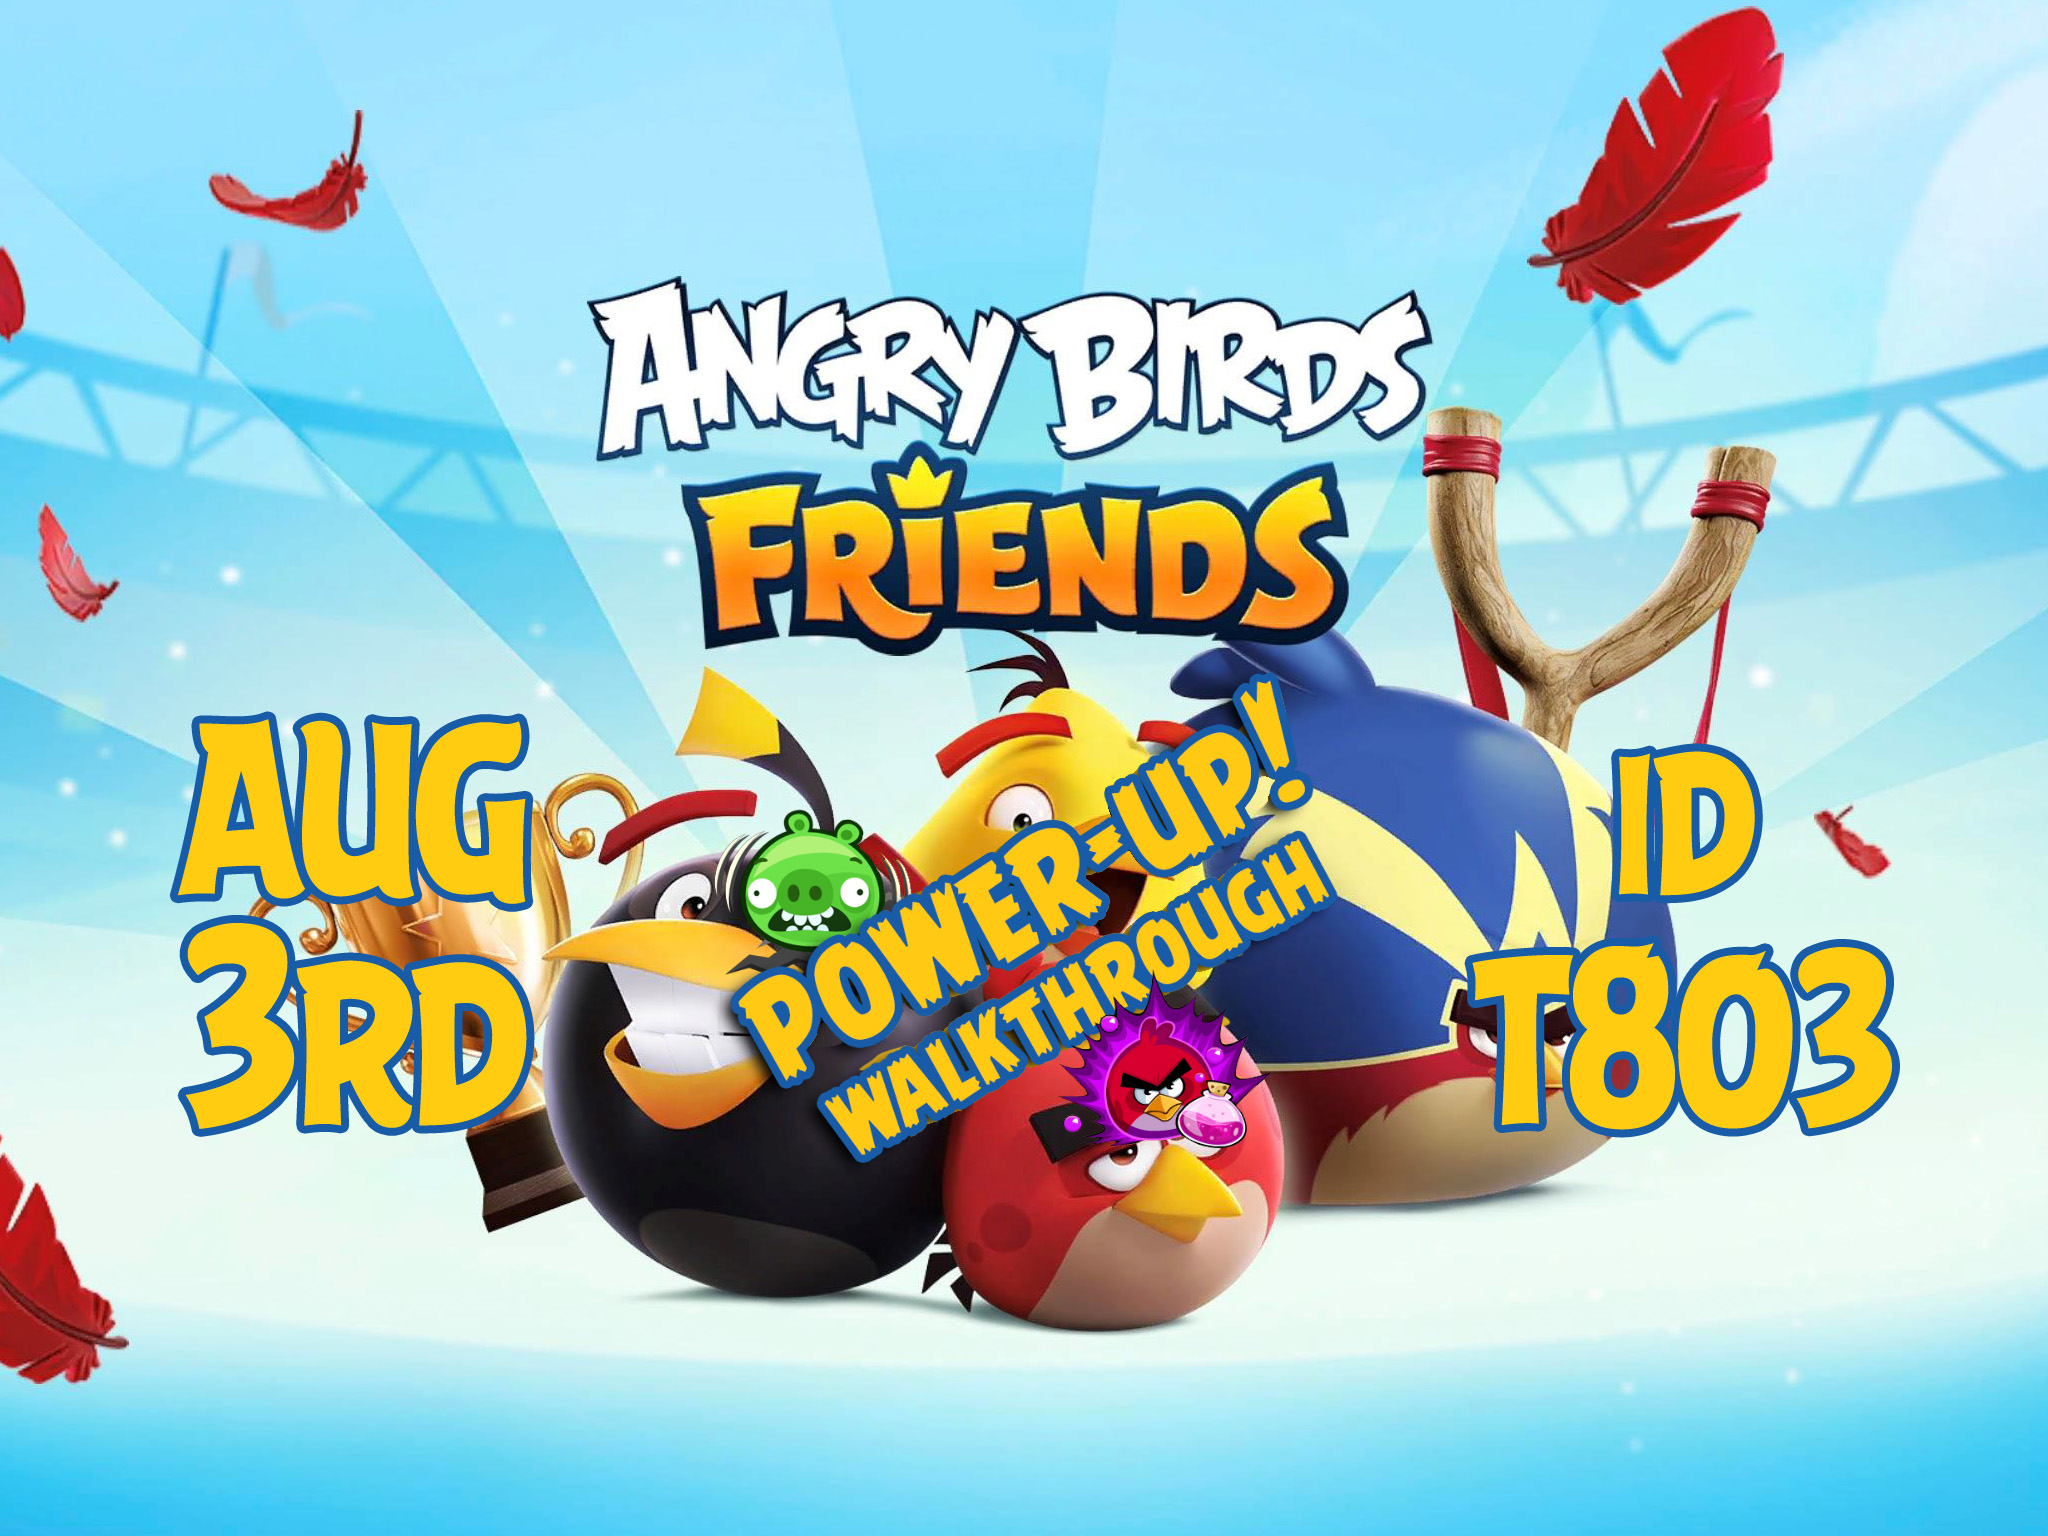 Angry-Birds-Friends-Tournament-T803-Feature-Image-PU